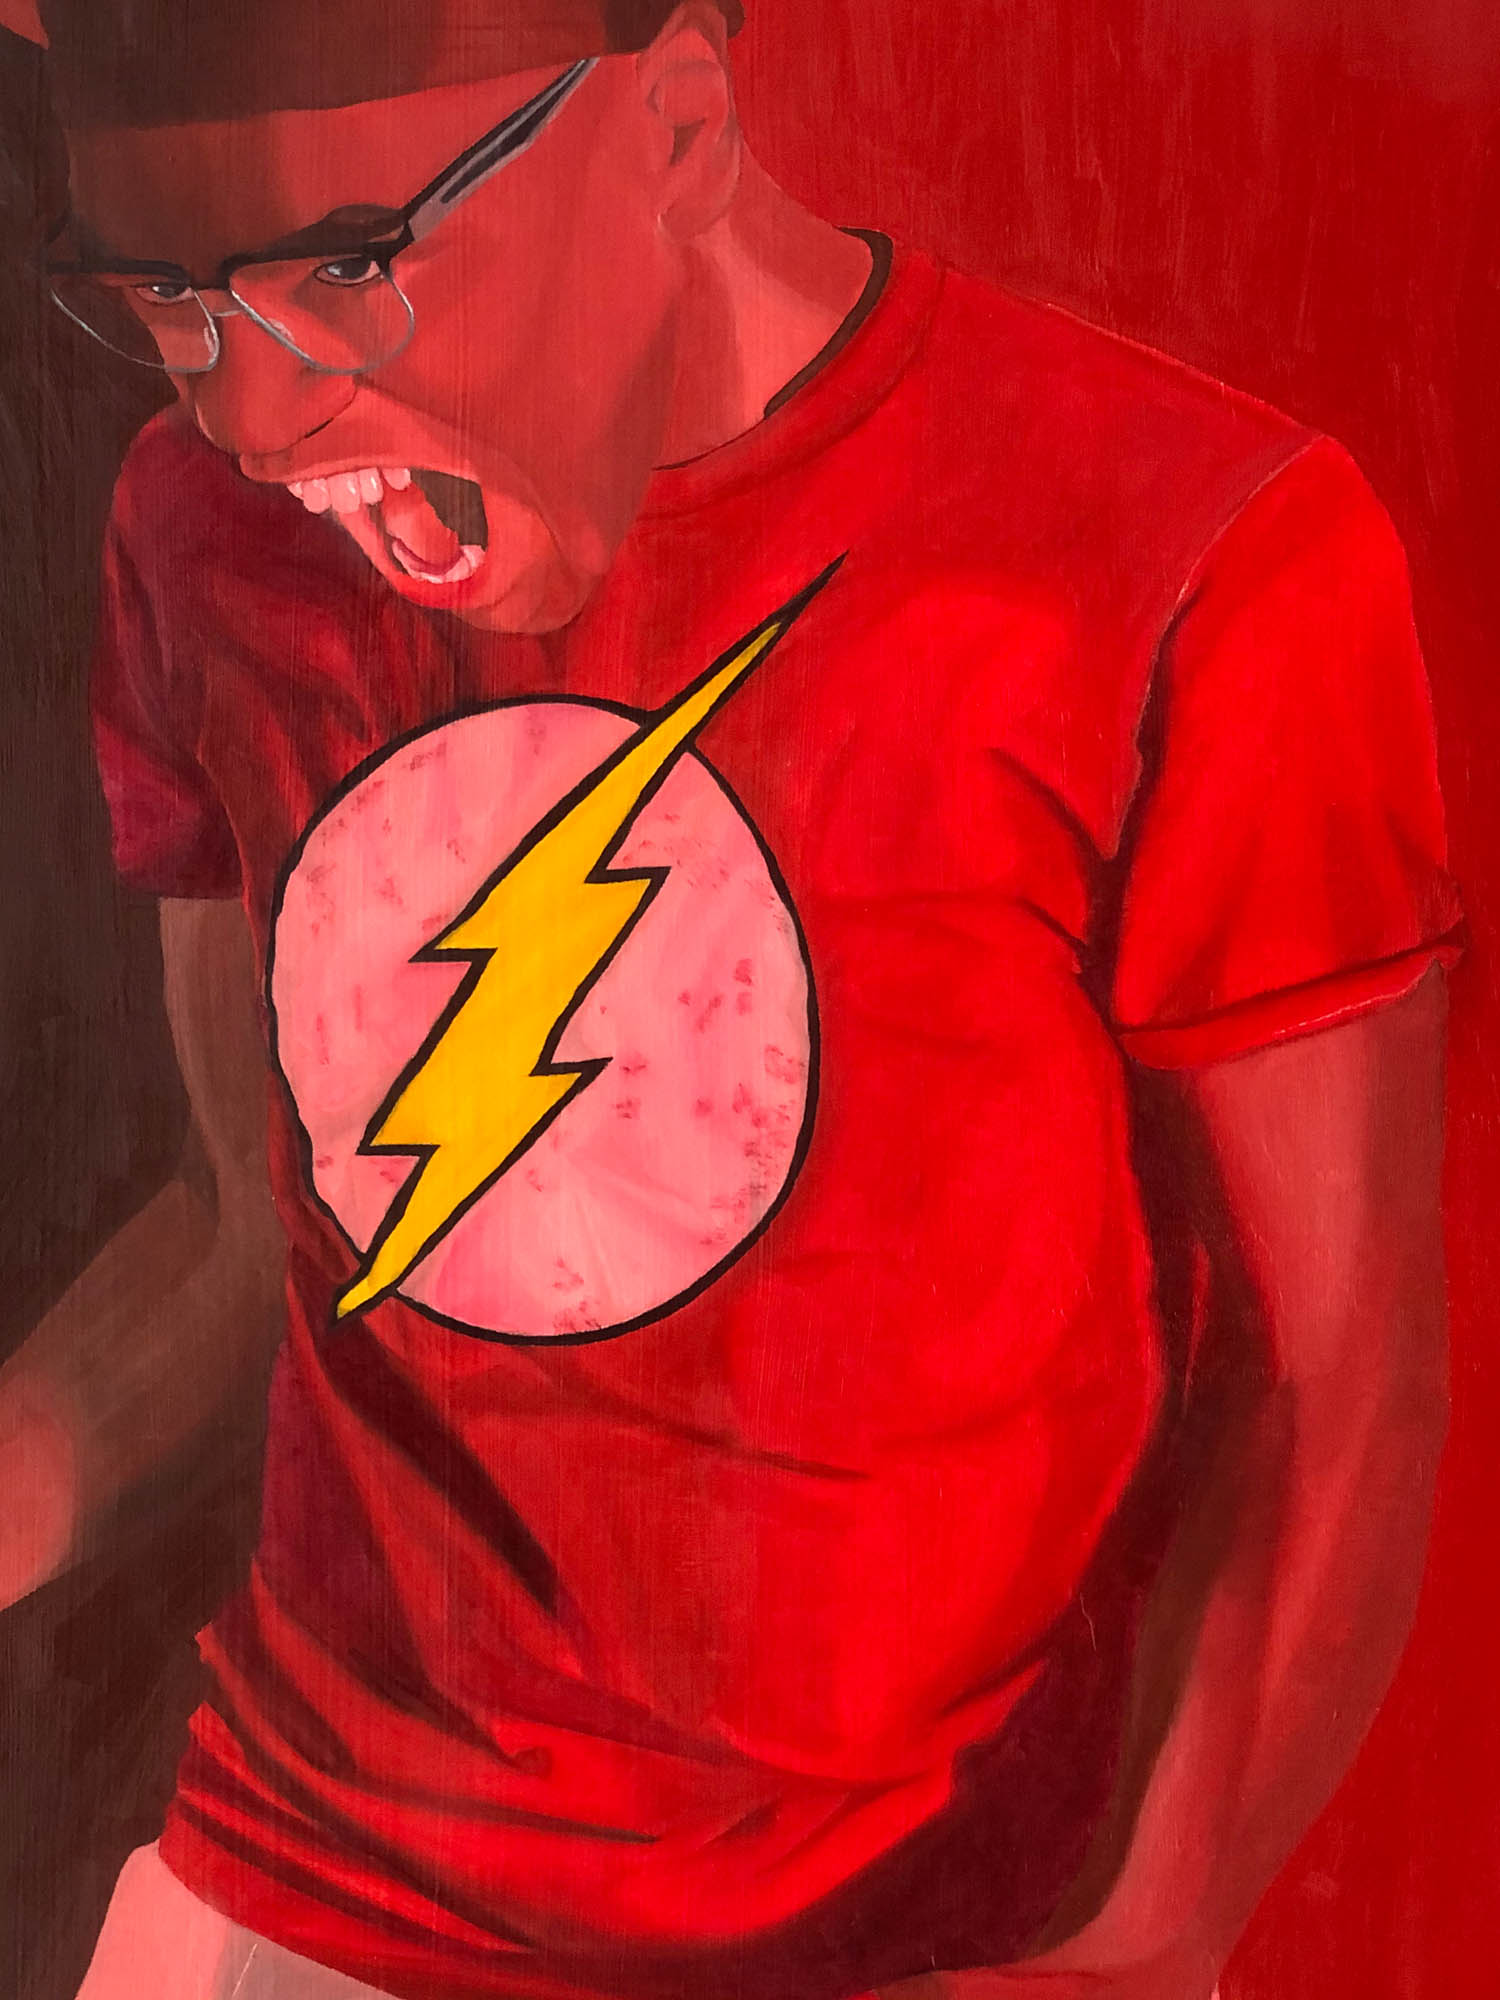 African American male friend emphasizing an emotion of happiness. Detailed and textural image of specific brush stroke and paint layering of reds, yellows, and whites on the male figure’s shirt.